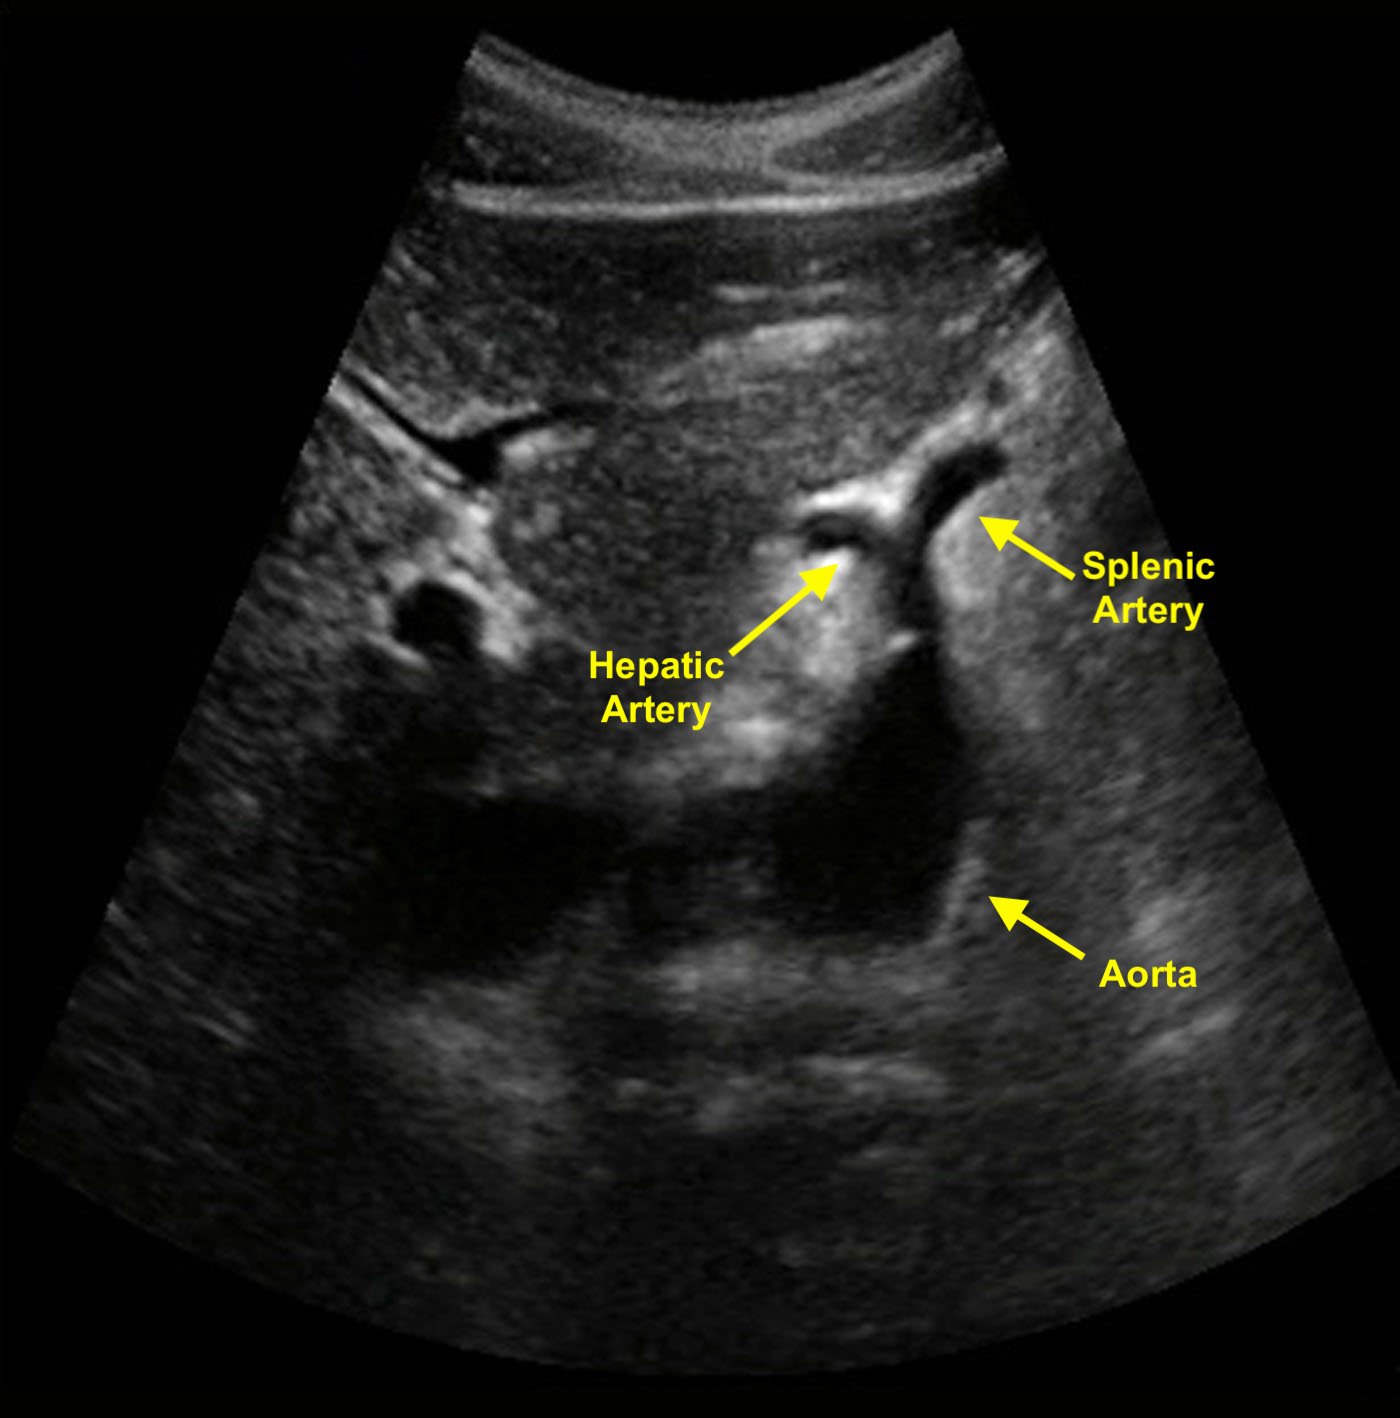 Figure 1 - Transverse image of the aorta shows a classic example of the seagull sign. The celiac trunk branches into the hepatic and splenic arteries..jpeg